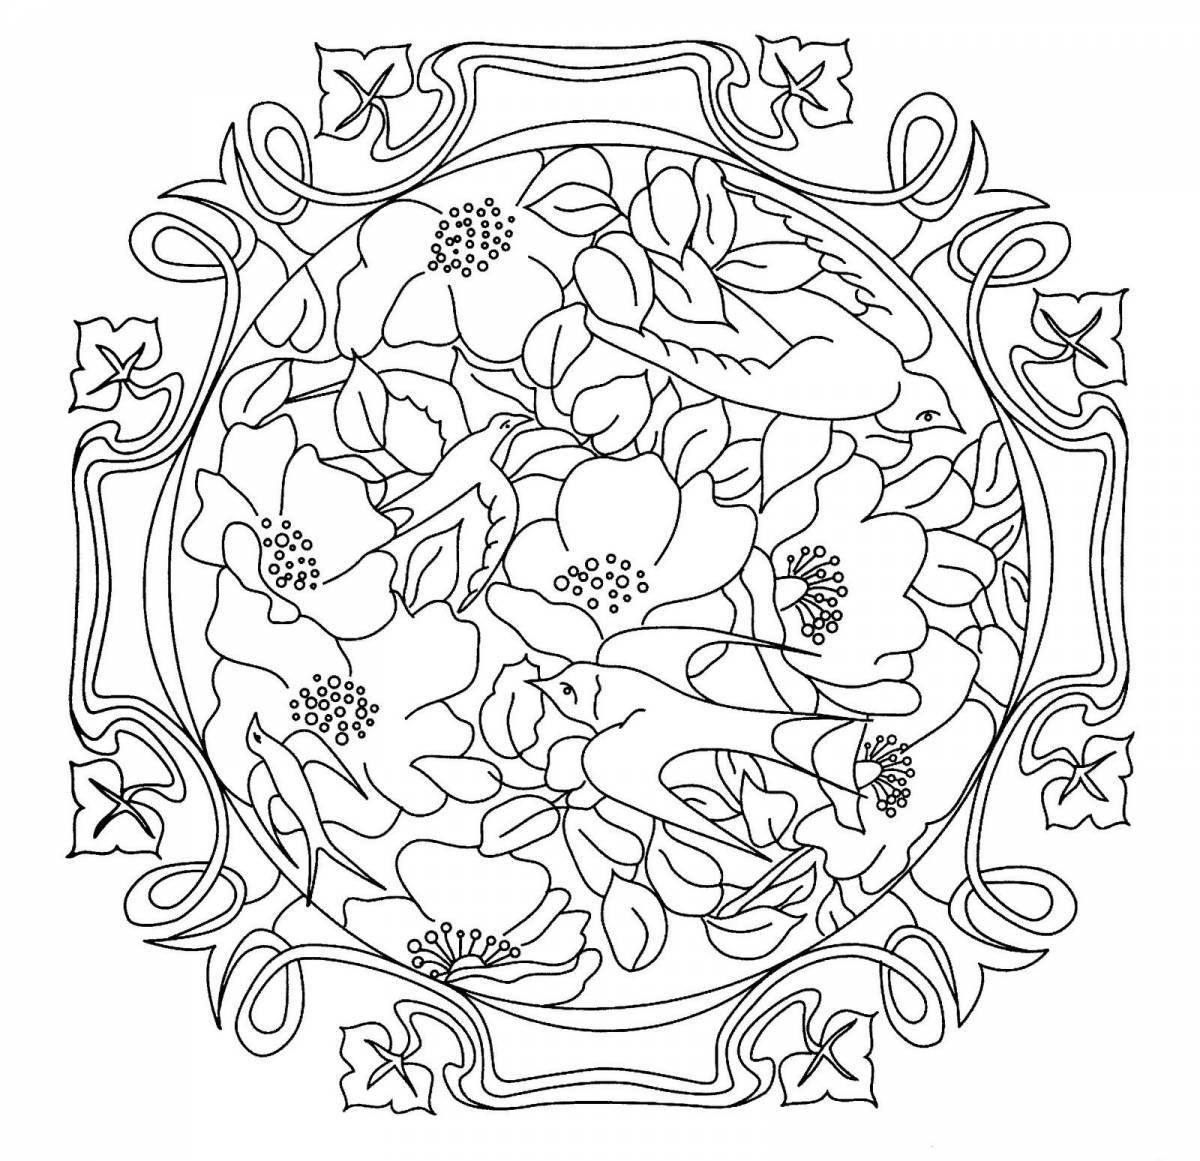 Coloring book with gorgeous floral patterns